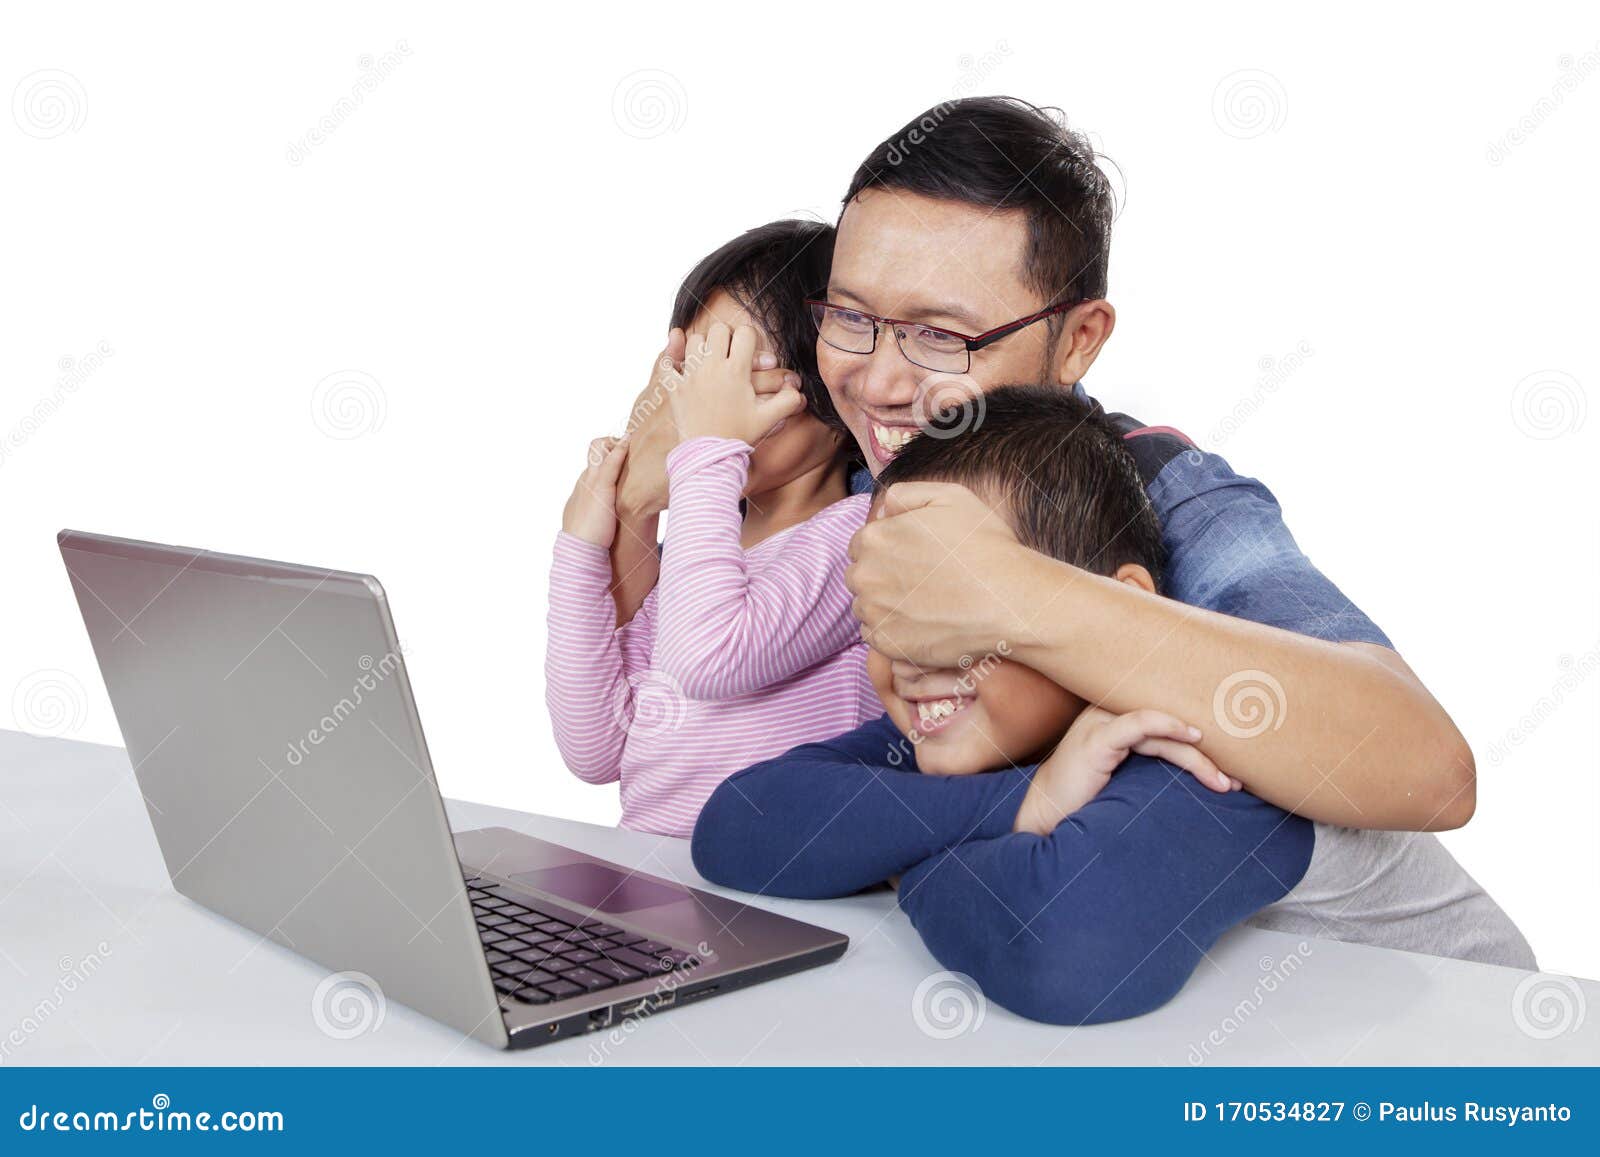 man covering his kids eyes from explicit content